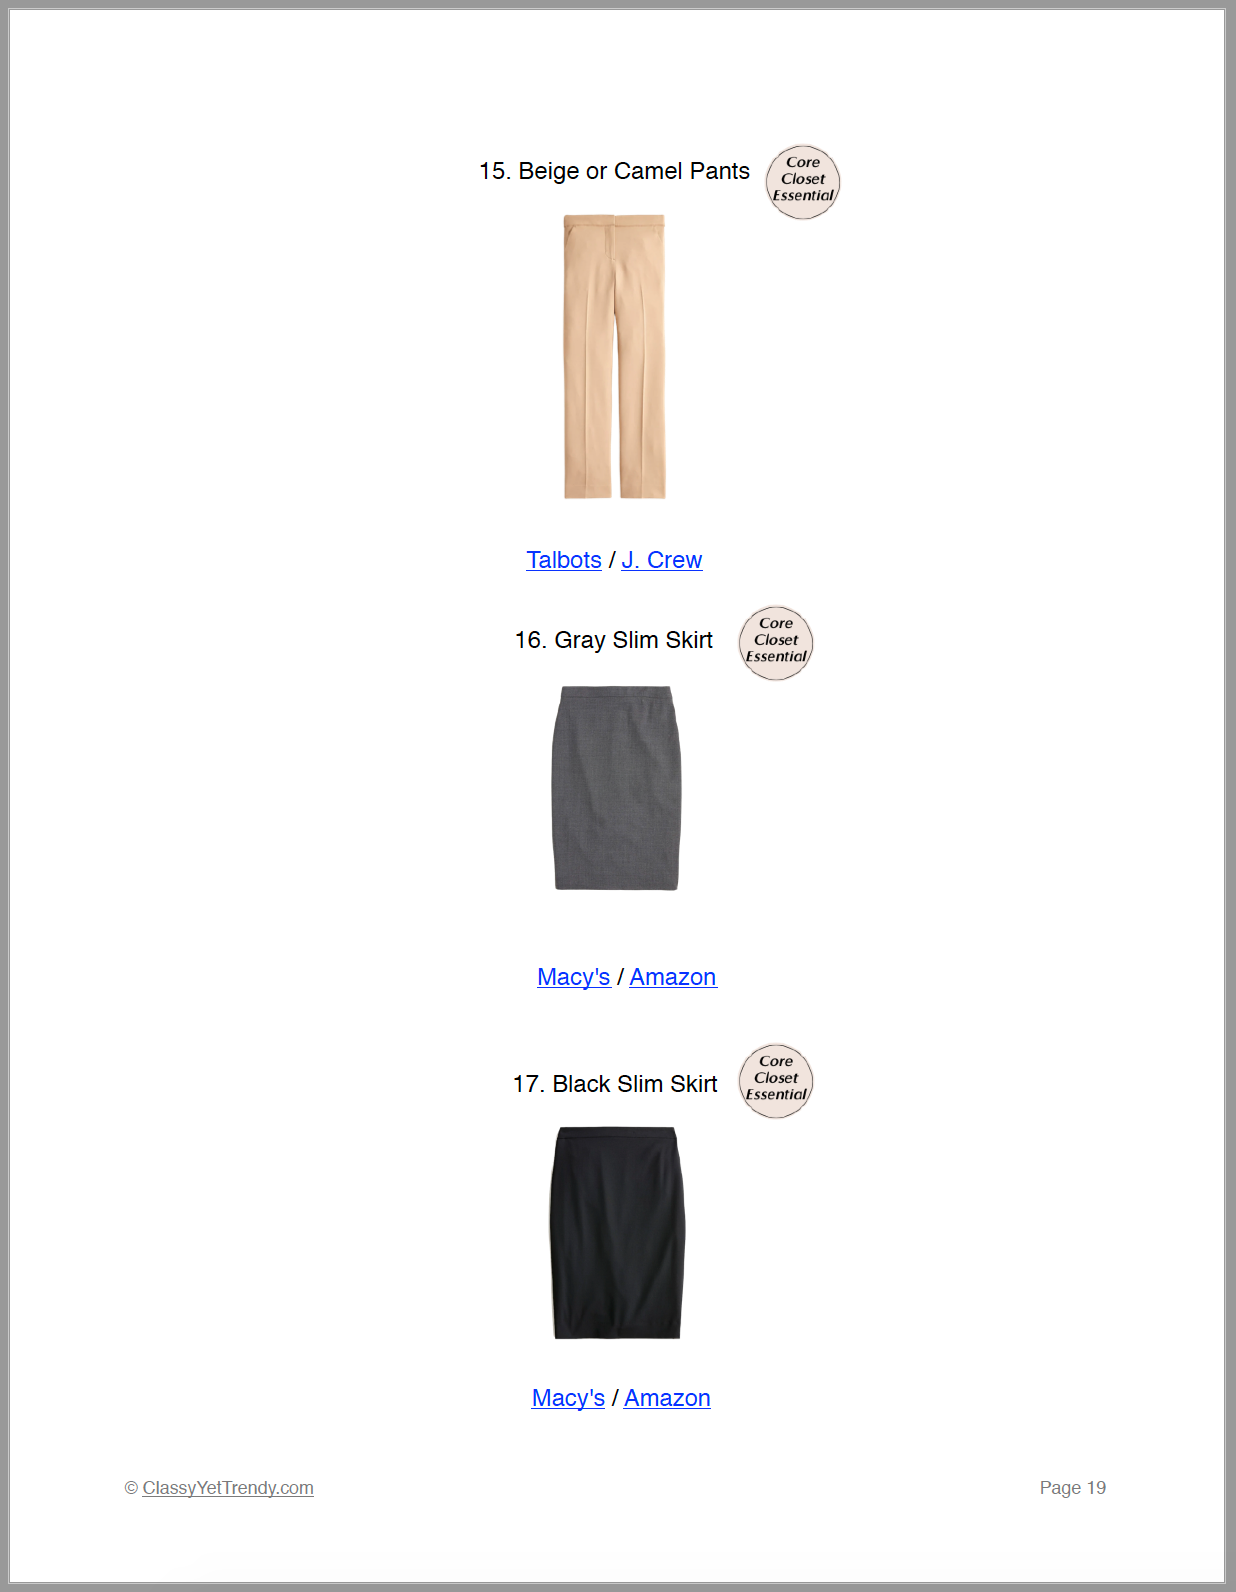 The Workwear Capsule Wardrobe - Summer 2022 Collection